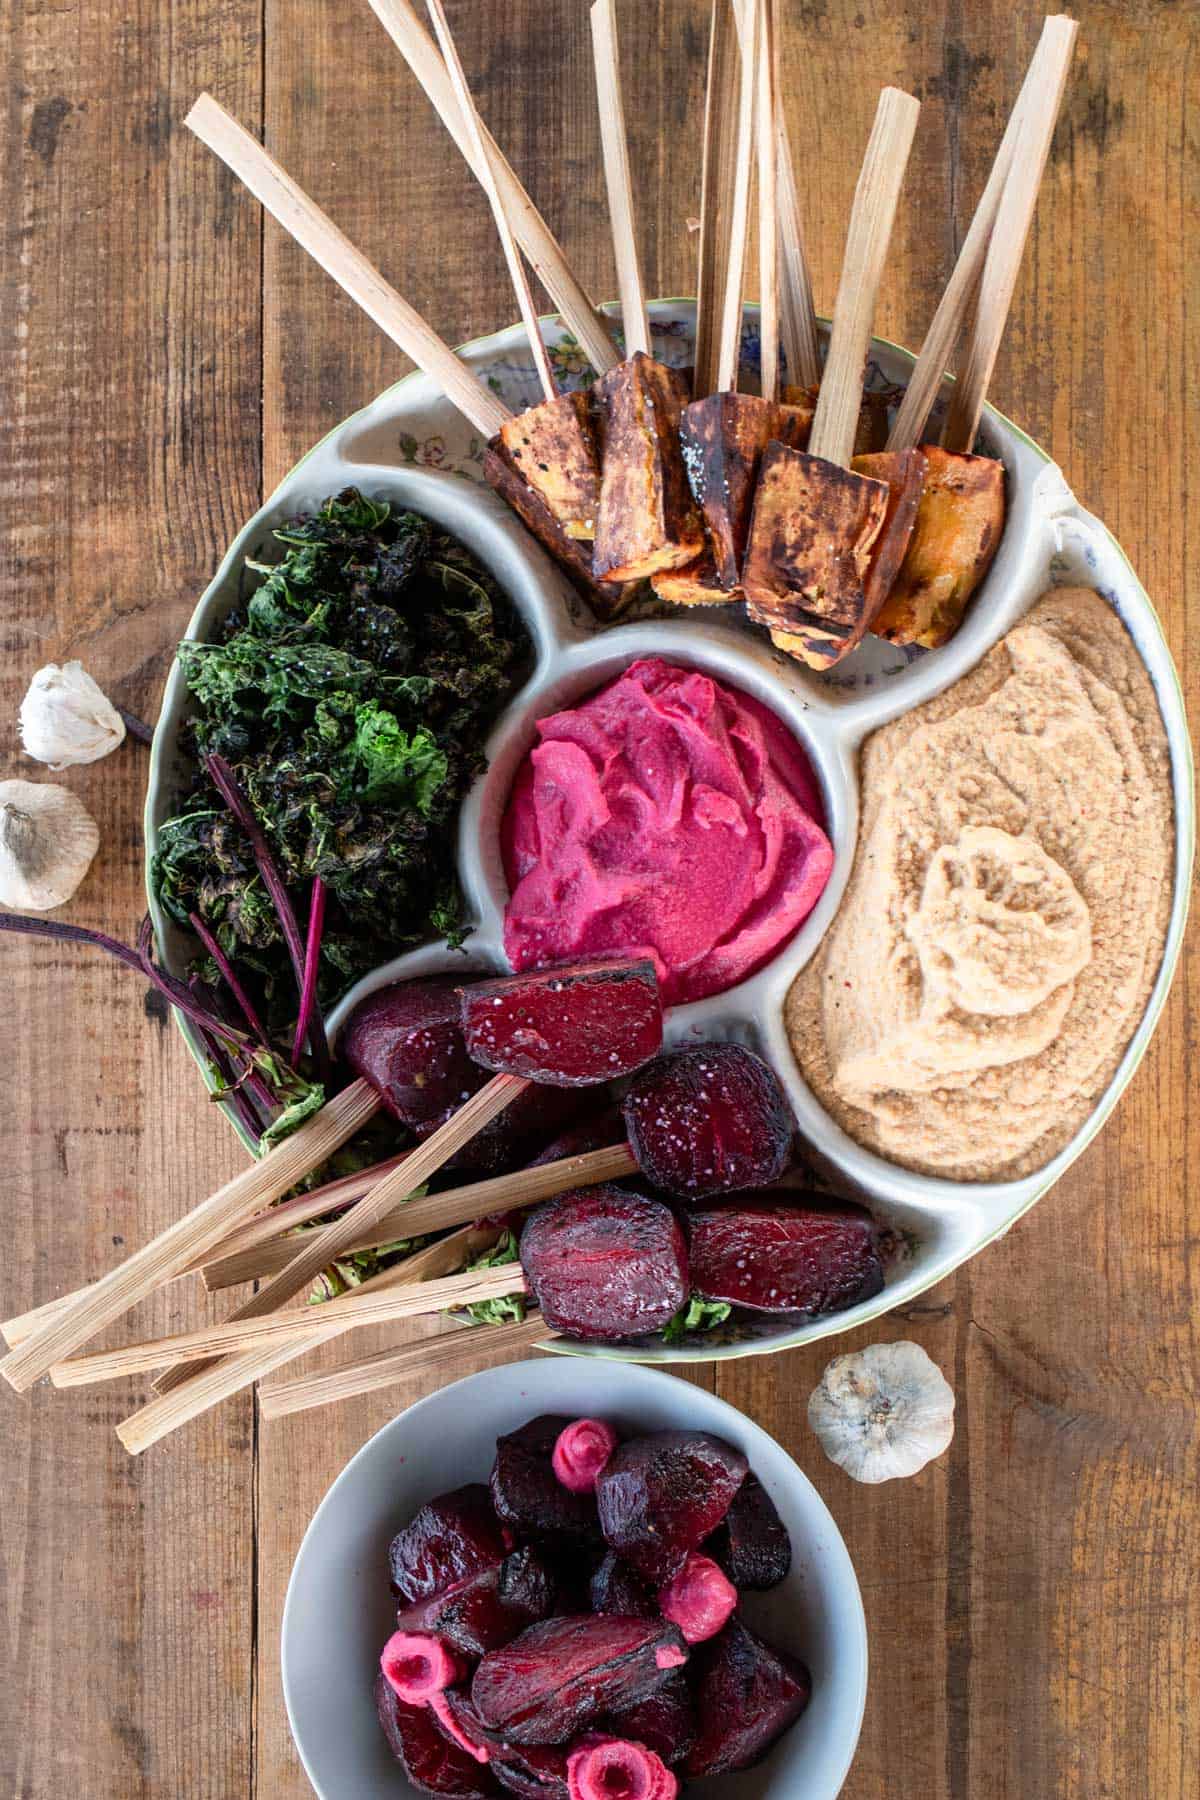 A round platter with skewered roasted vegetables, kale, beet hummus, traditional hummus, and a bowl of pickled beets on a wooden table.